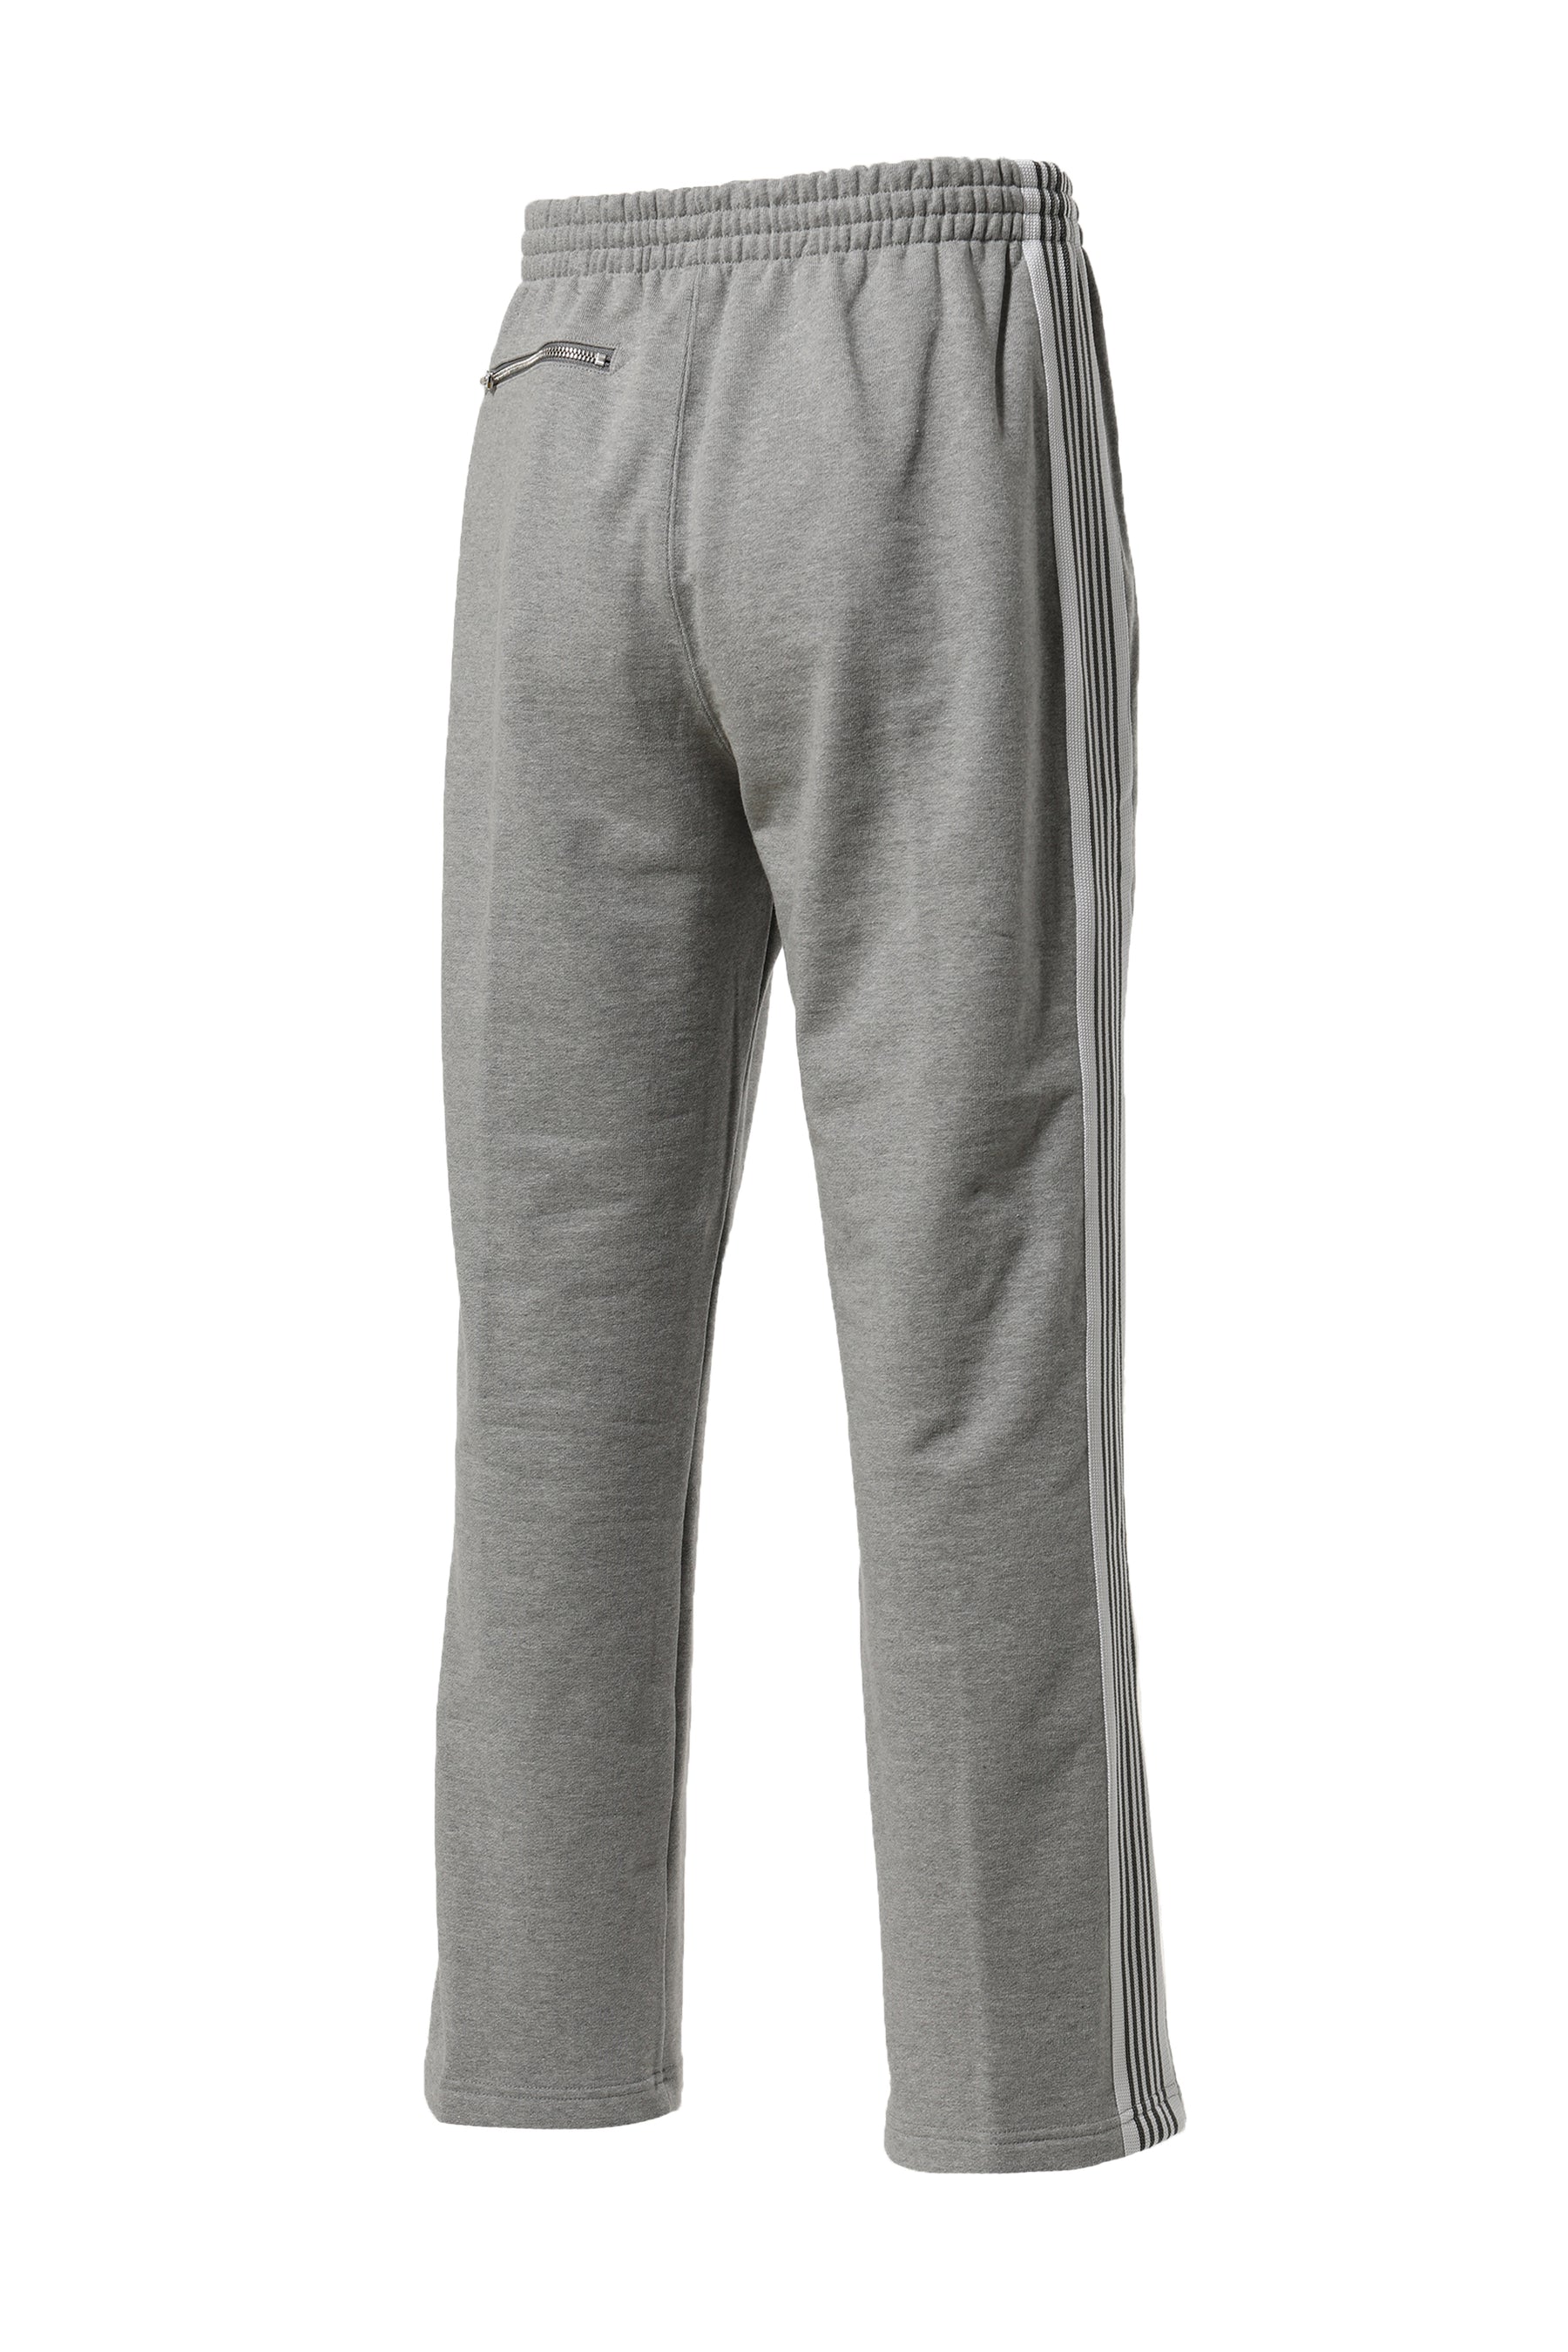 Needles ニードルズ SS23 TRACK PANTS - COTTON JERSEY (EXCLUSIVE ...